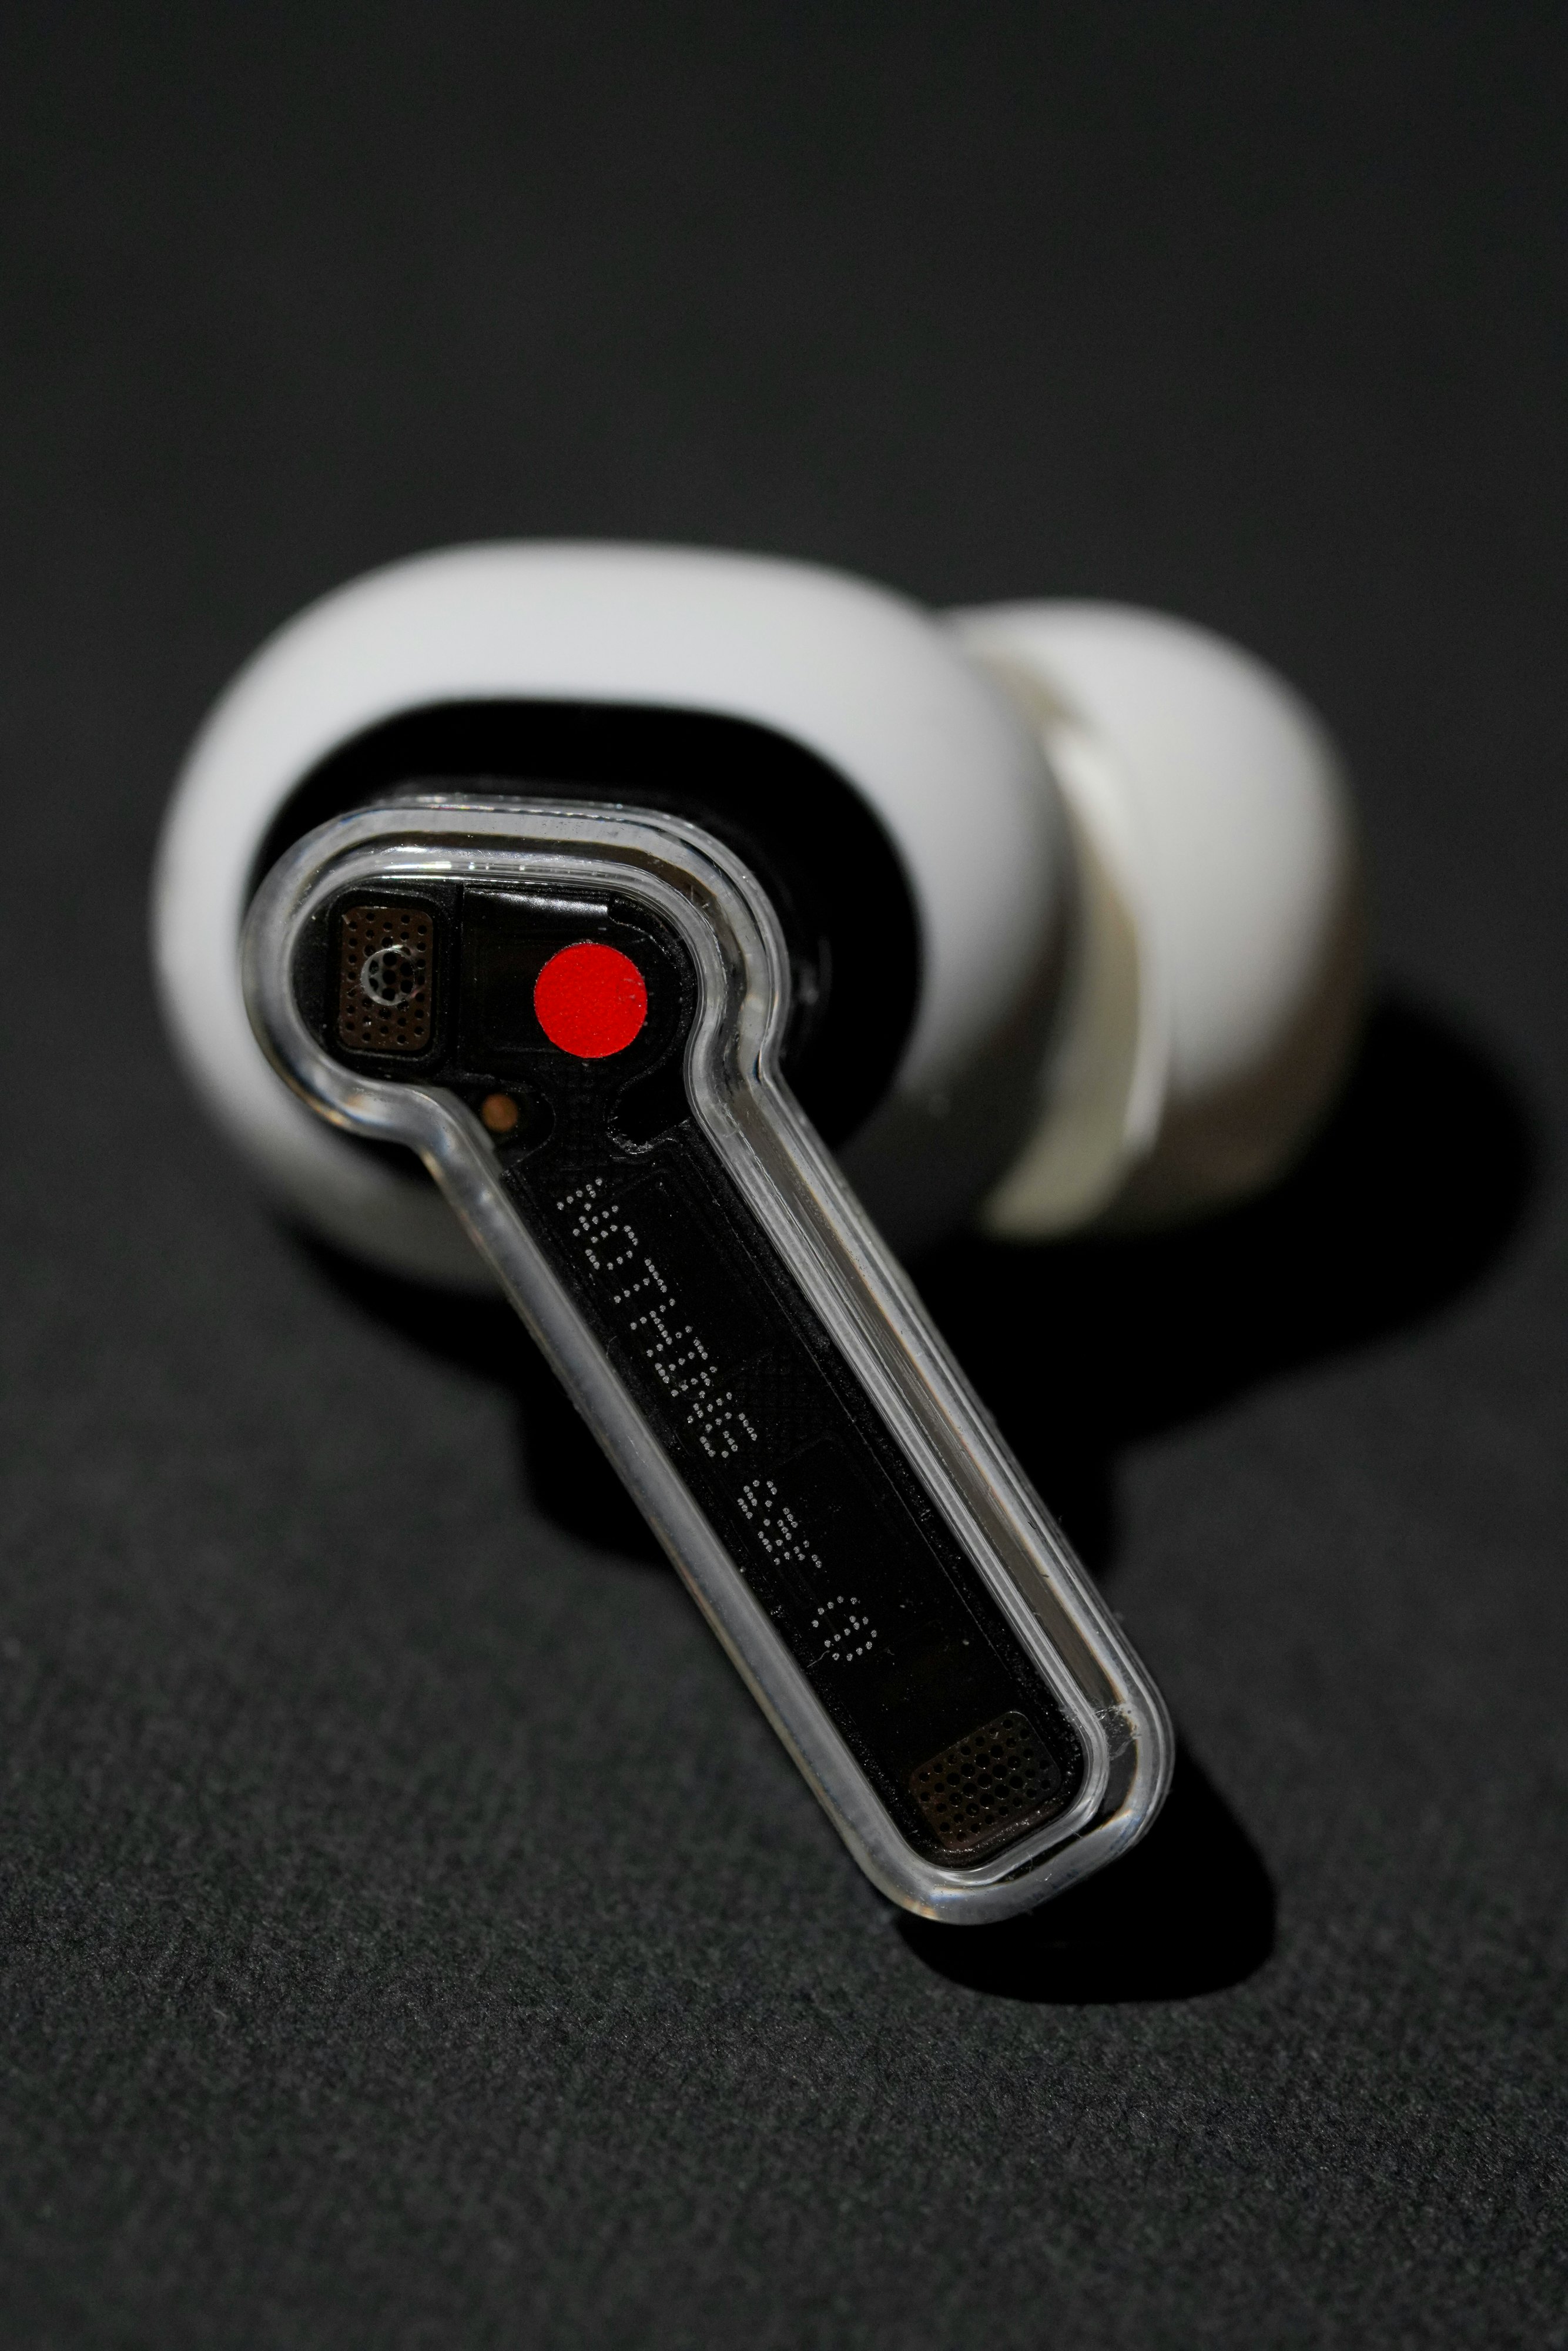 Nothing Ear 1 review - SoundGuys